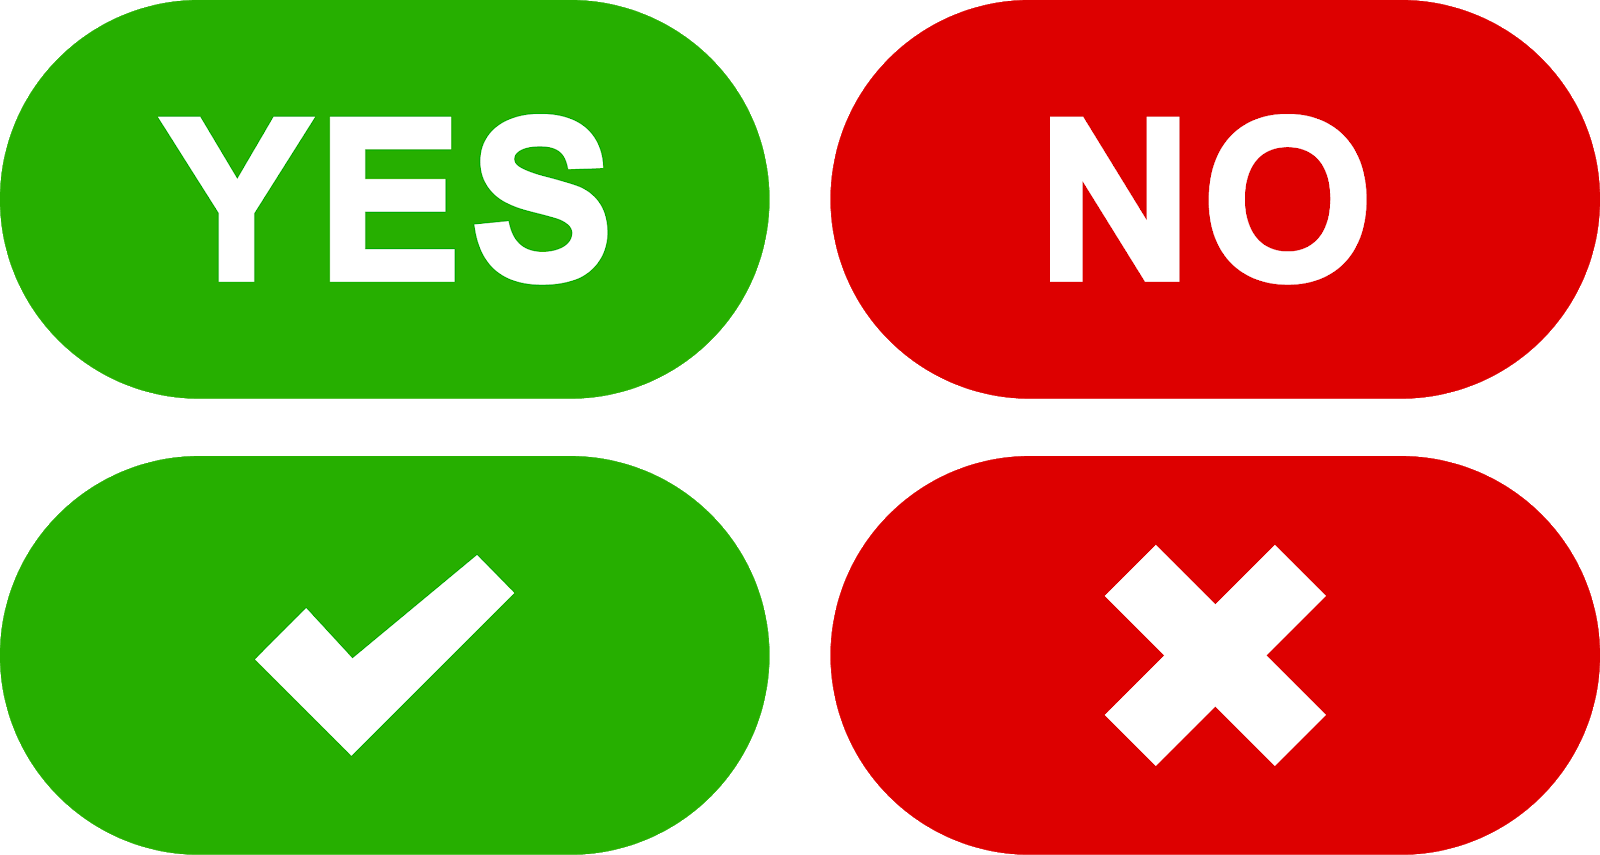 Yes No Buttons Set Download Svg Eps Png Psd Ai Vector Color Free